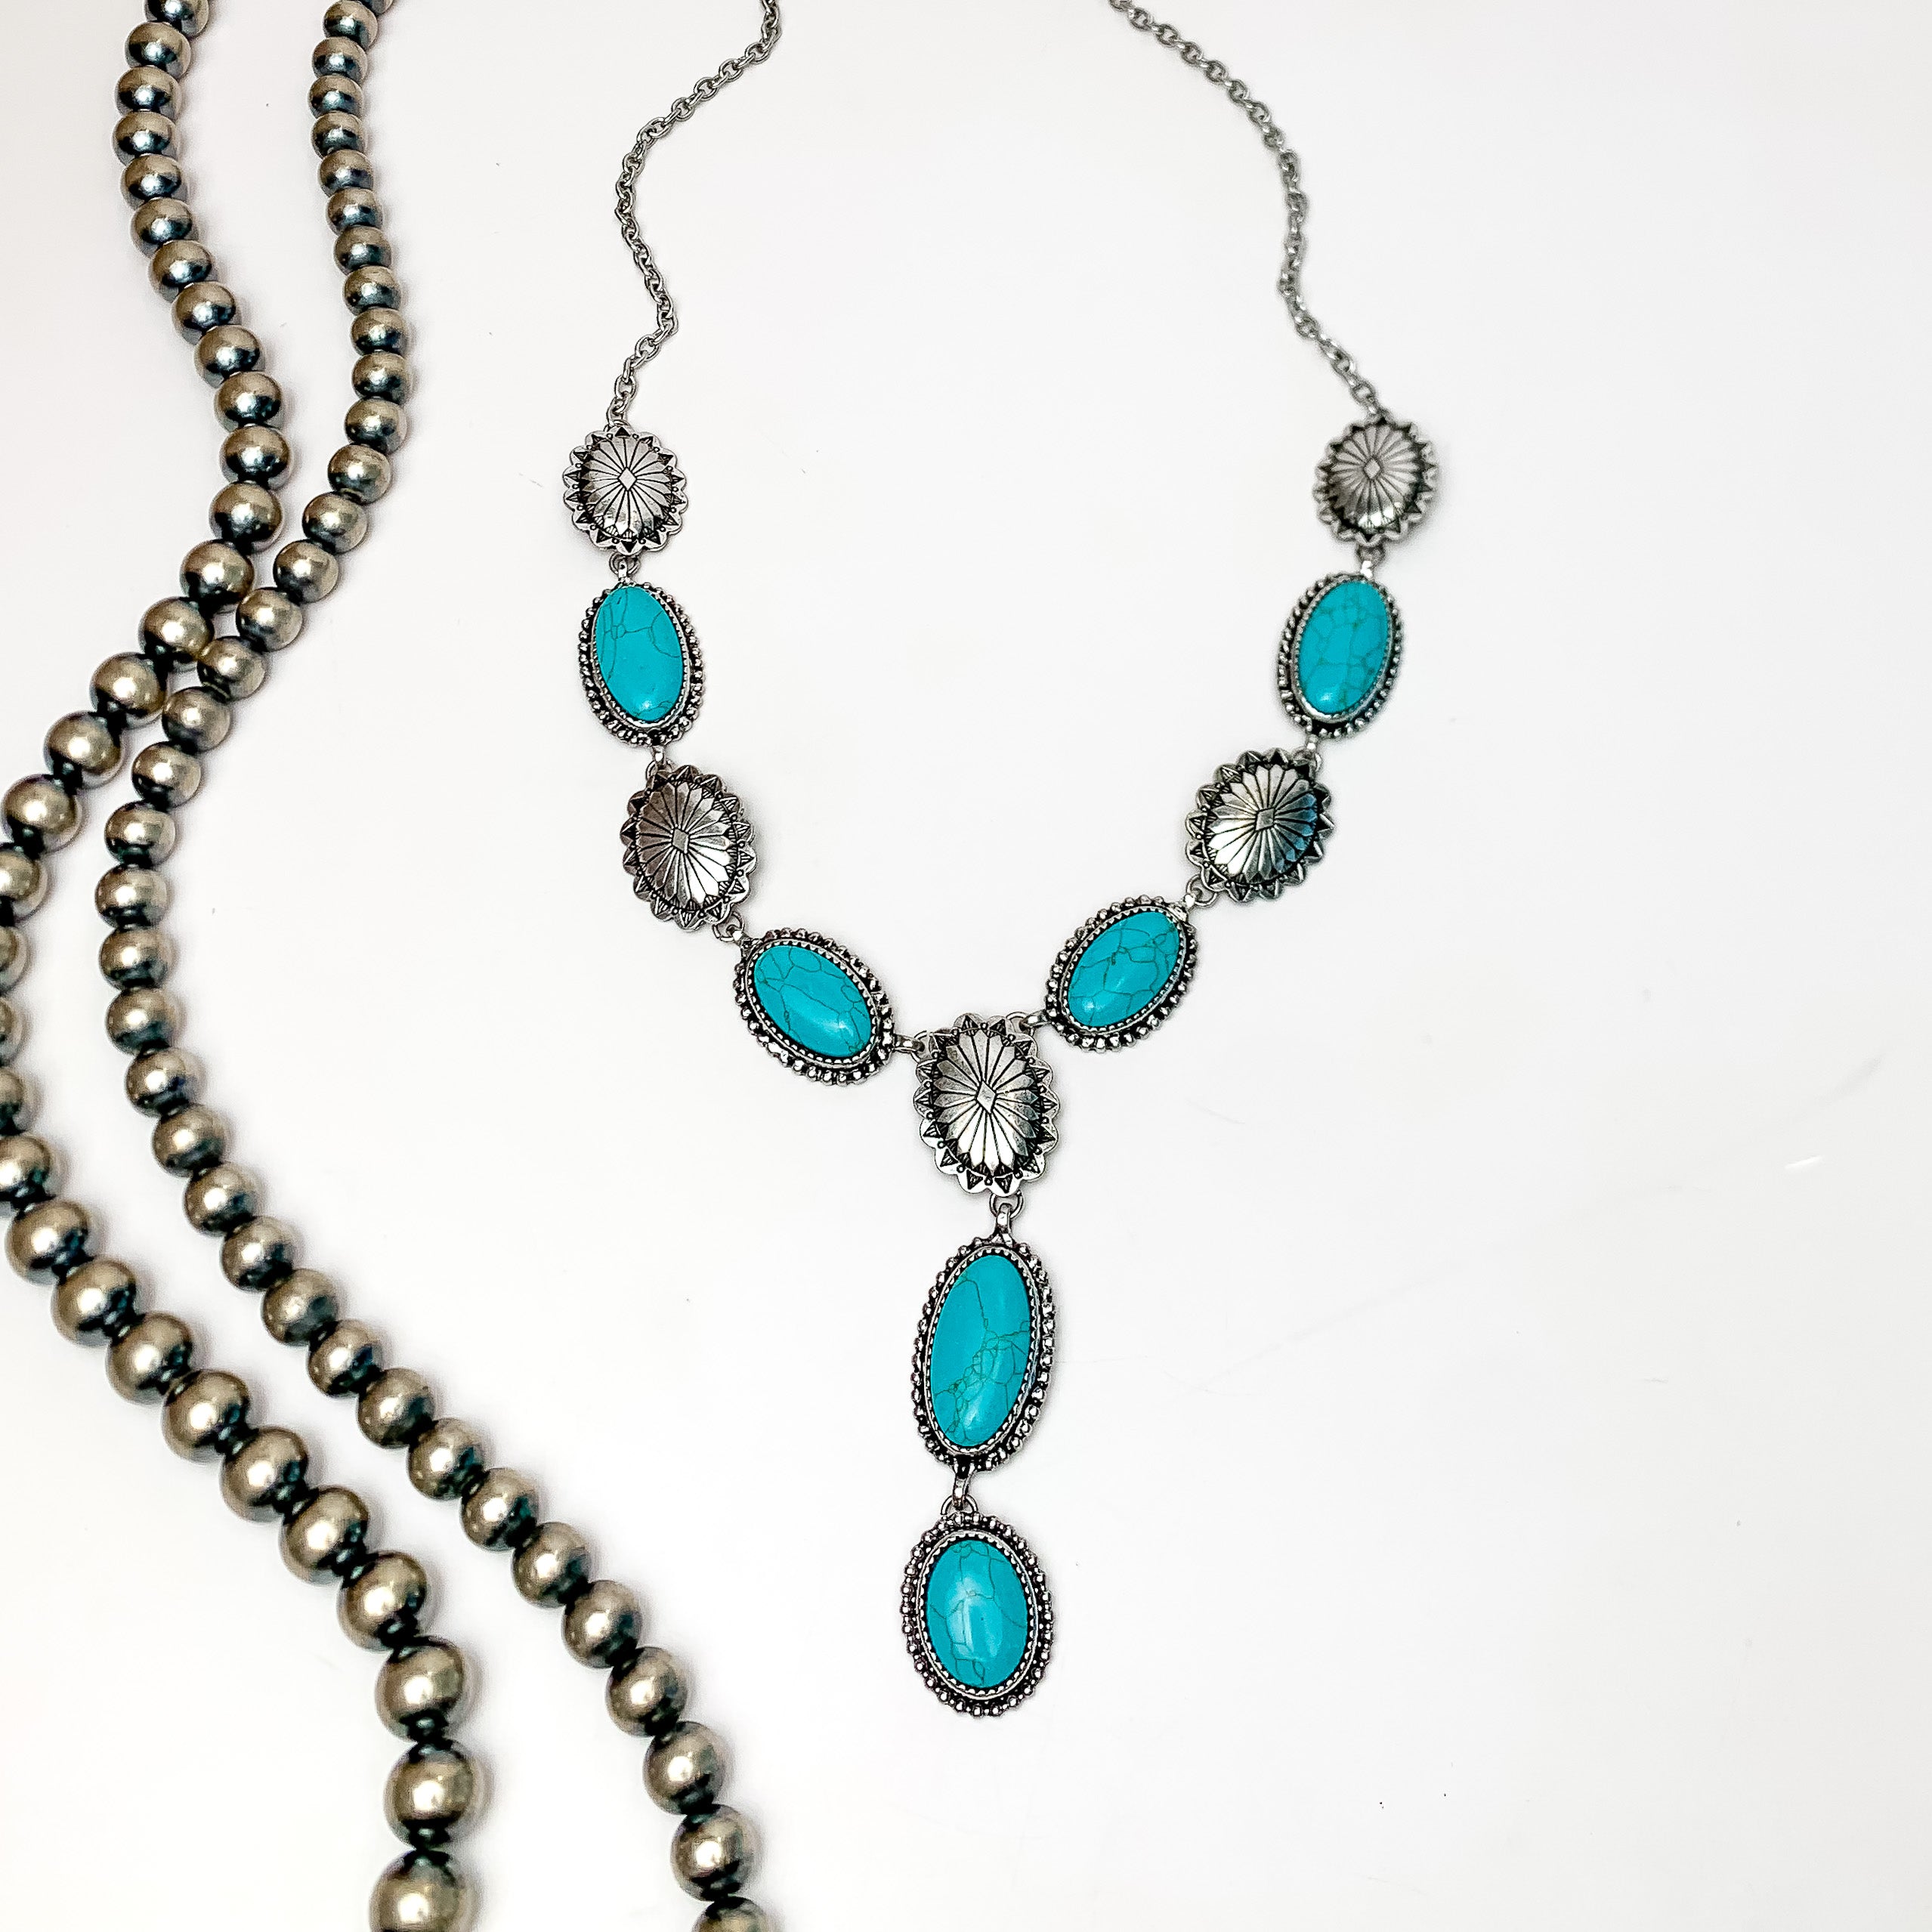 Western Oval Turquoise and Silver Tone Y Necklace. Pictured on a white background with Navajo beads on the left.